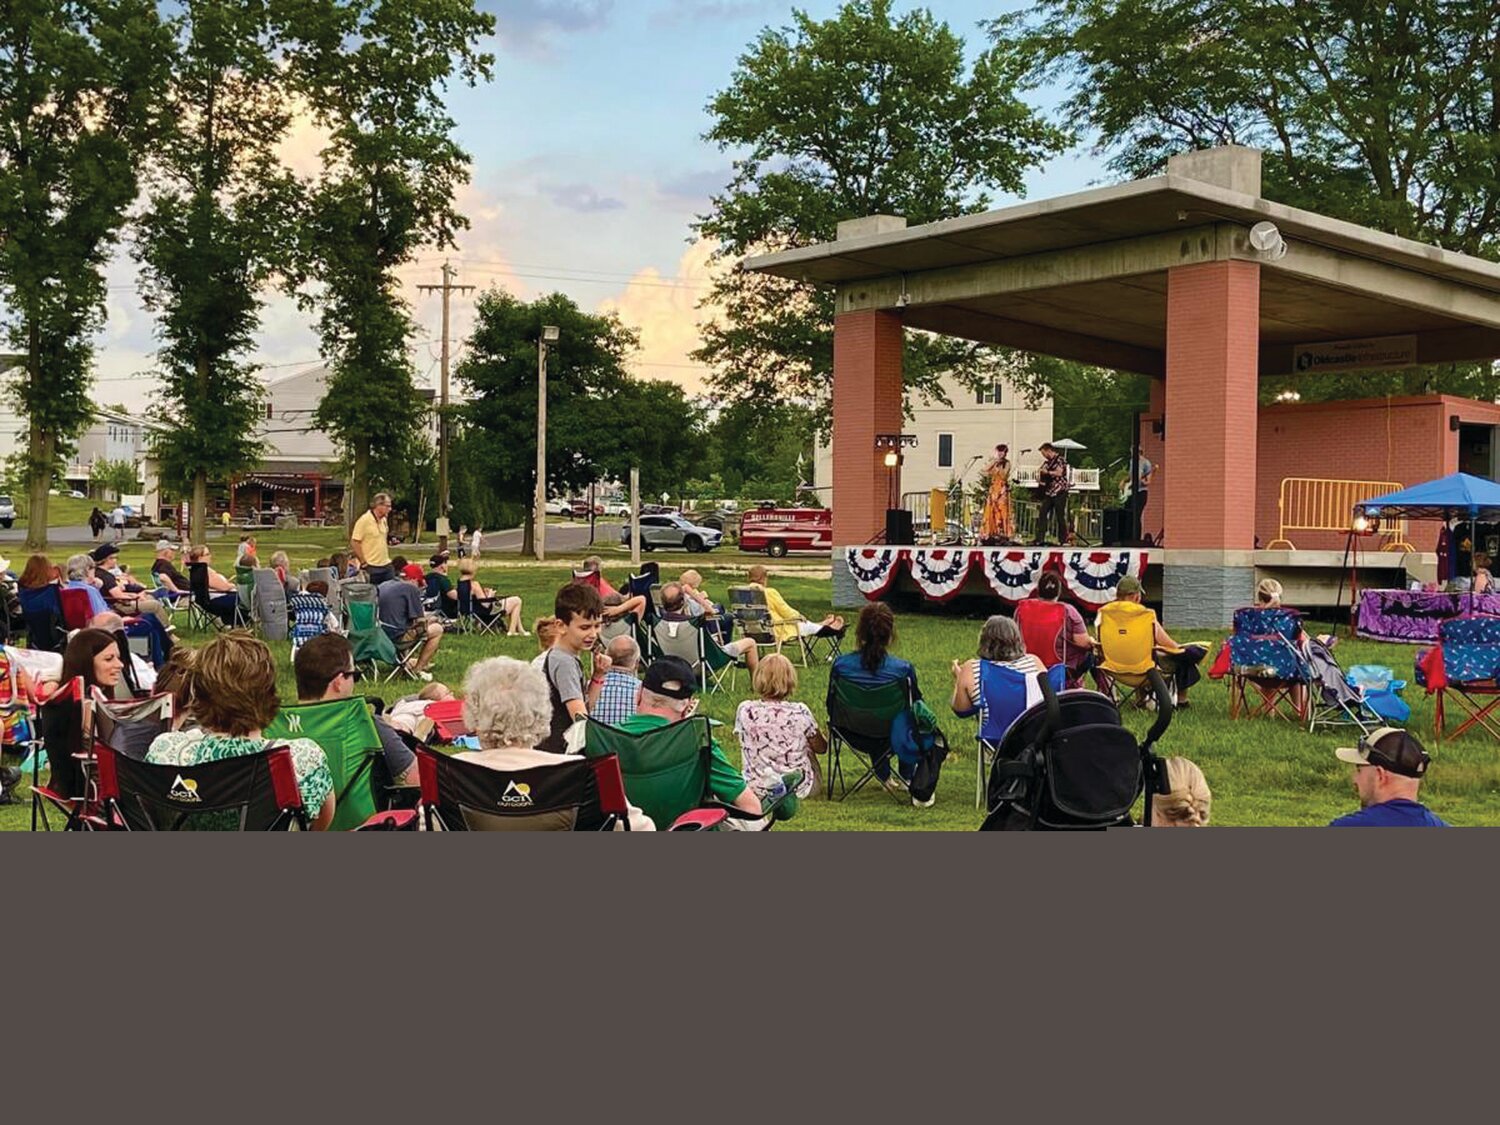 The Lenape Park Amphitheater is the setting for Perkasie’s free Summer Concert Series.